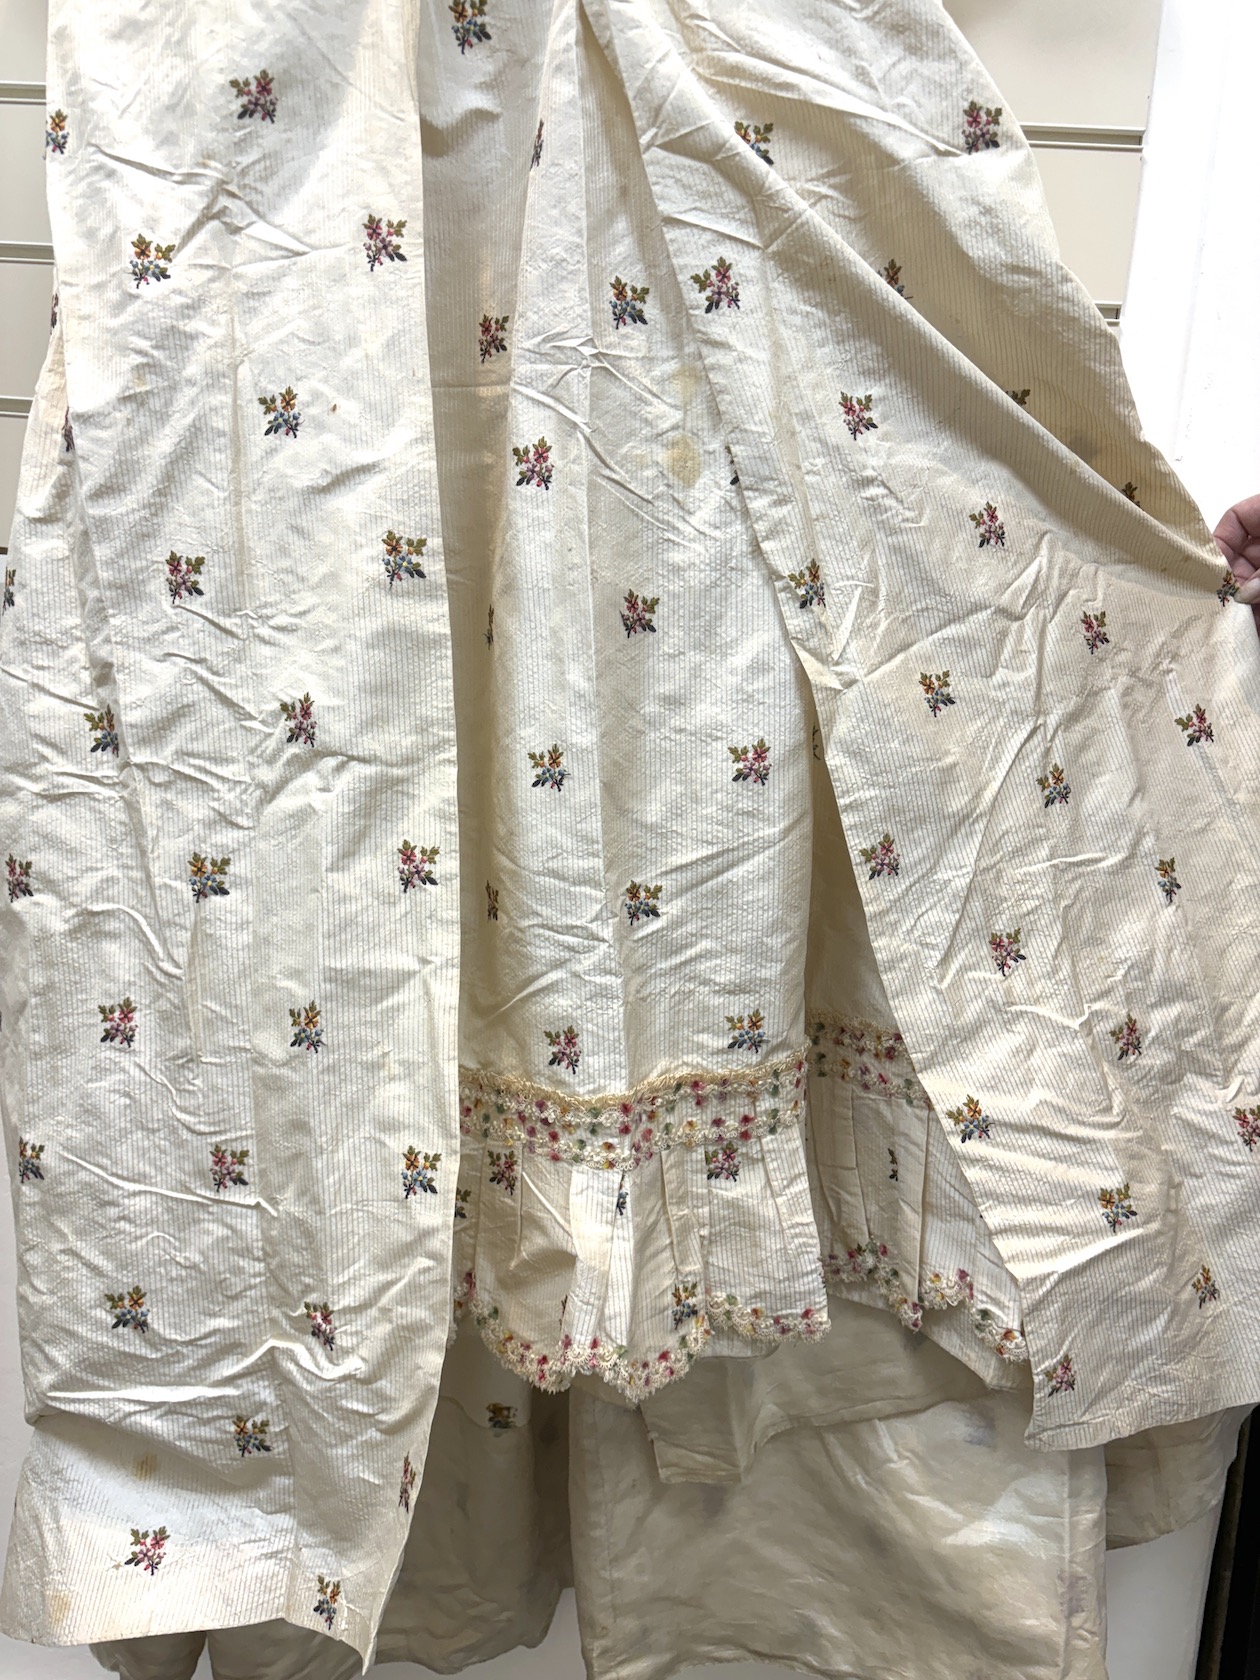 A rare 18th century, possibly Spitalfields, cream silk ladies dress, circa 1770-1780, made in the English style